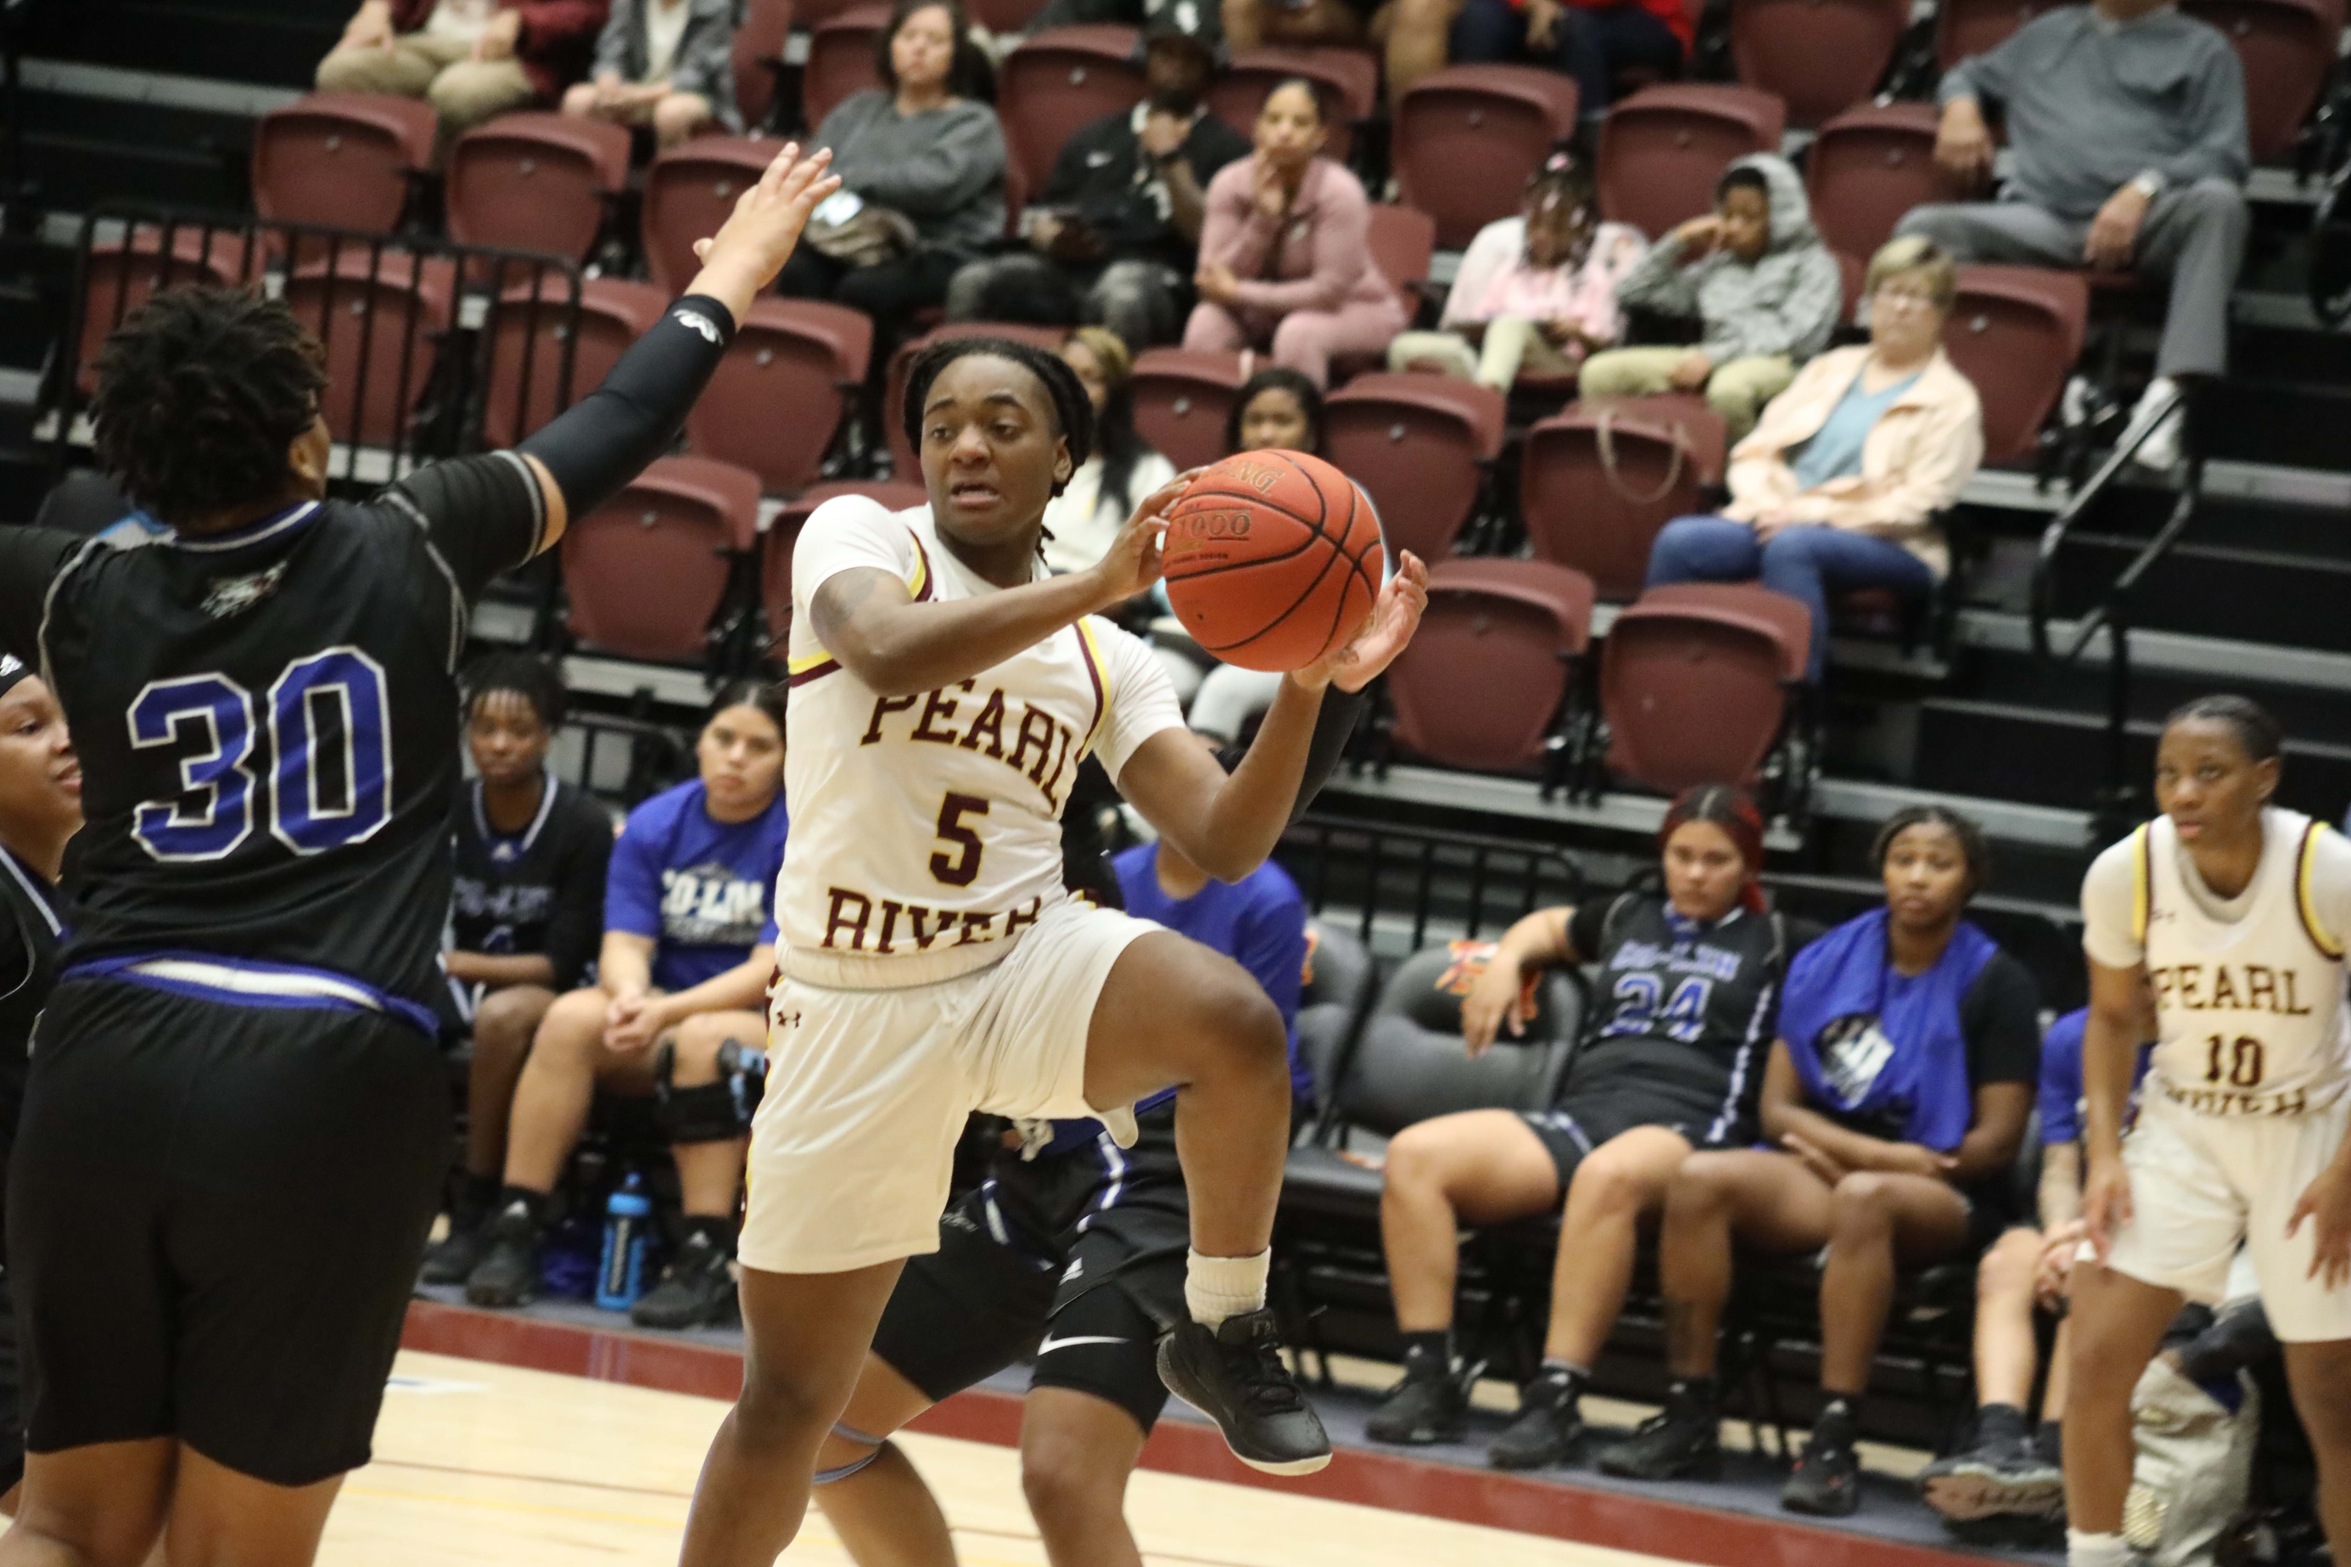 Pearl River overcomes a slow start to win big over Co-Lin